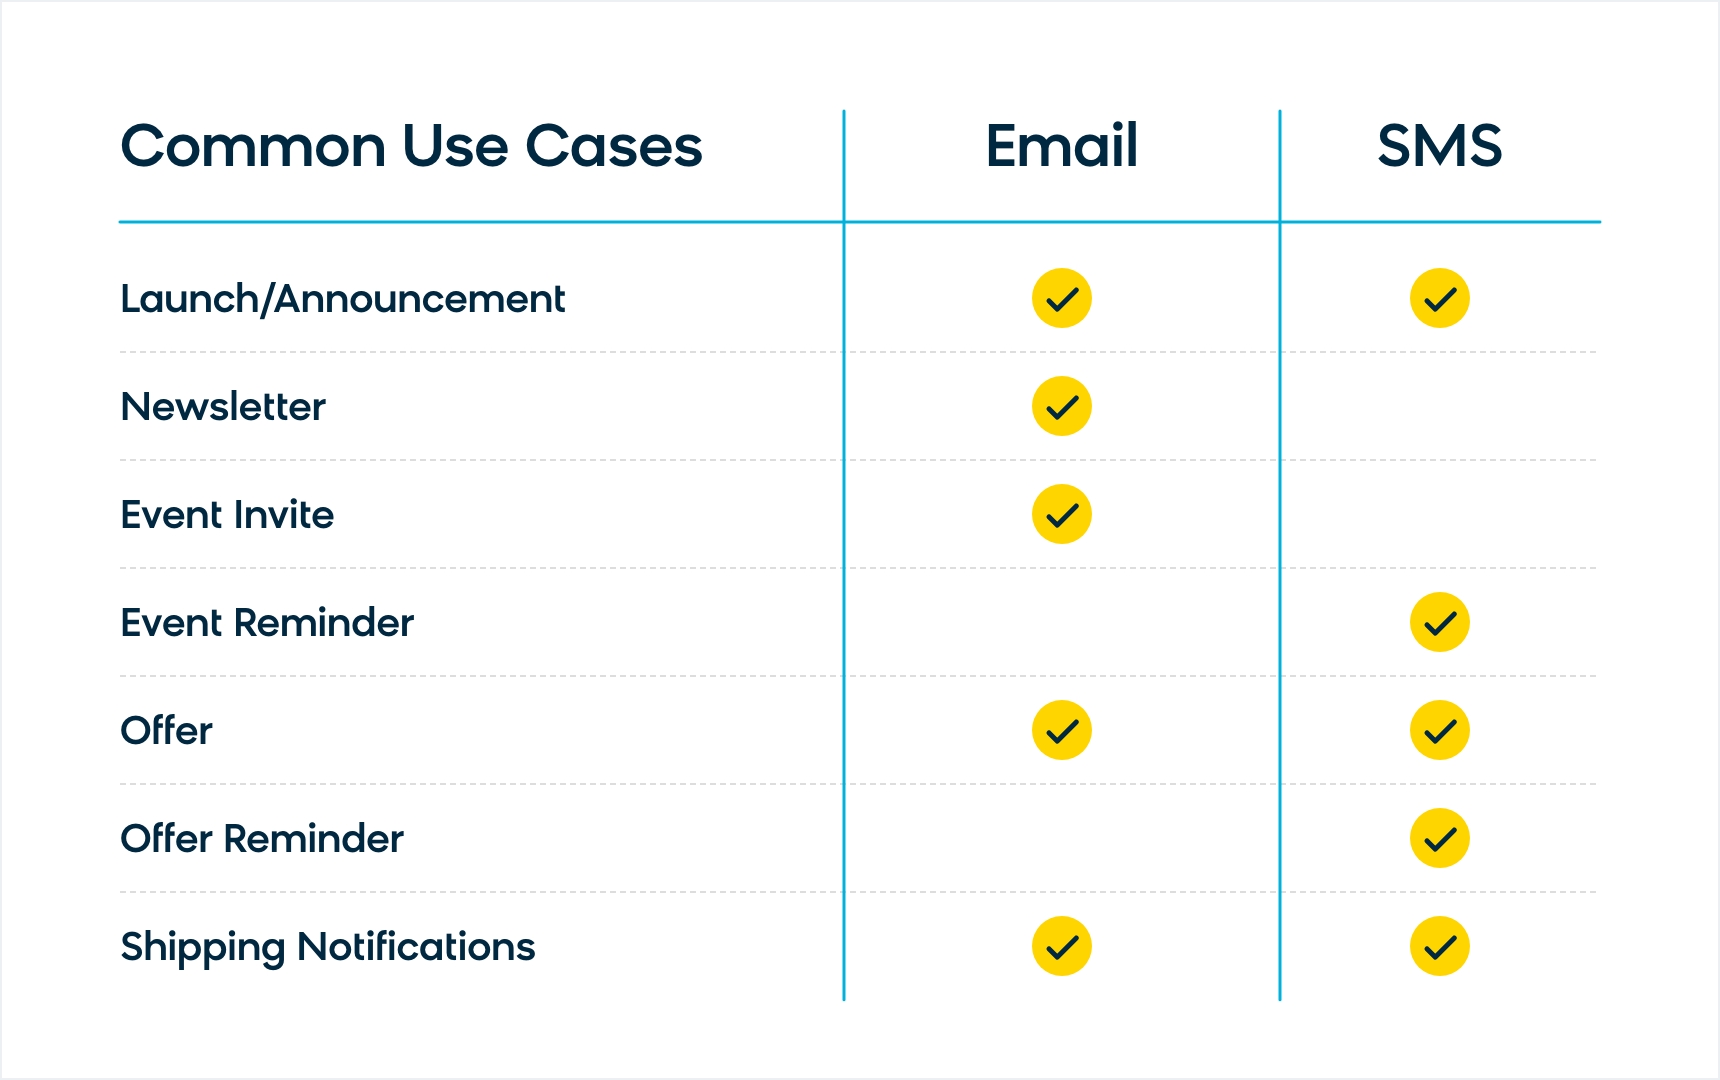 A chart showing the common use cases for both emails and SMS campaigns.